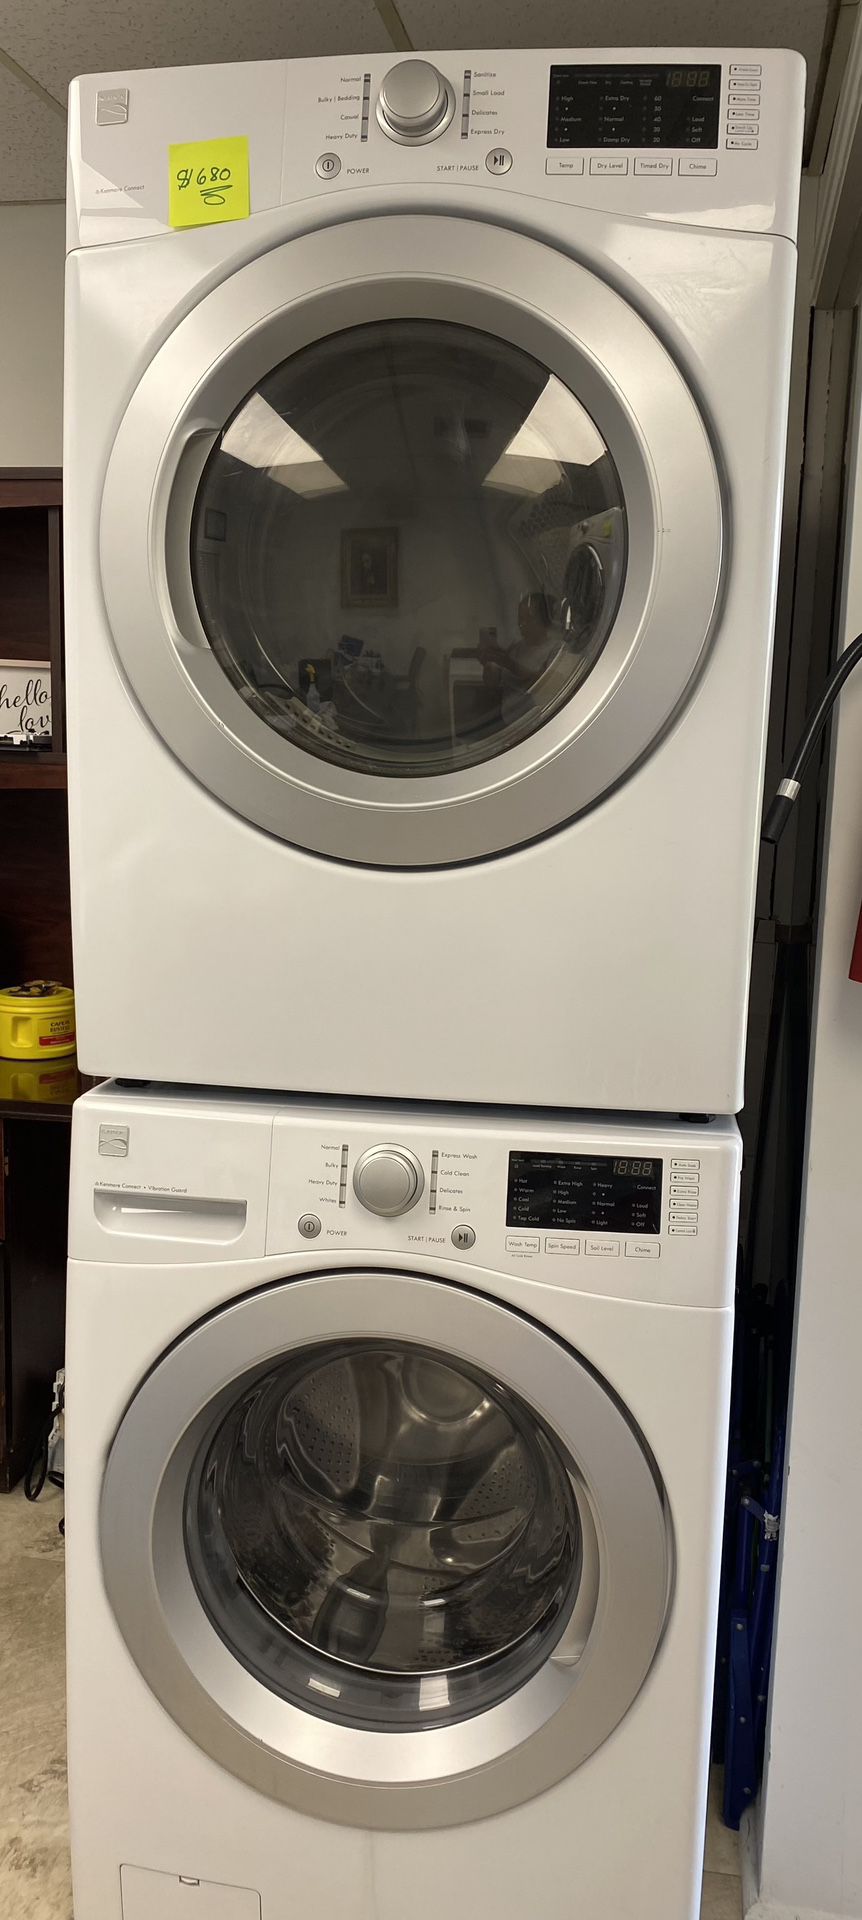 Kenmore Washer And Dryer Set Working Perfectly Fine 